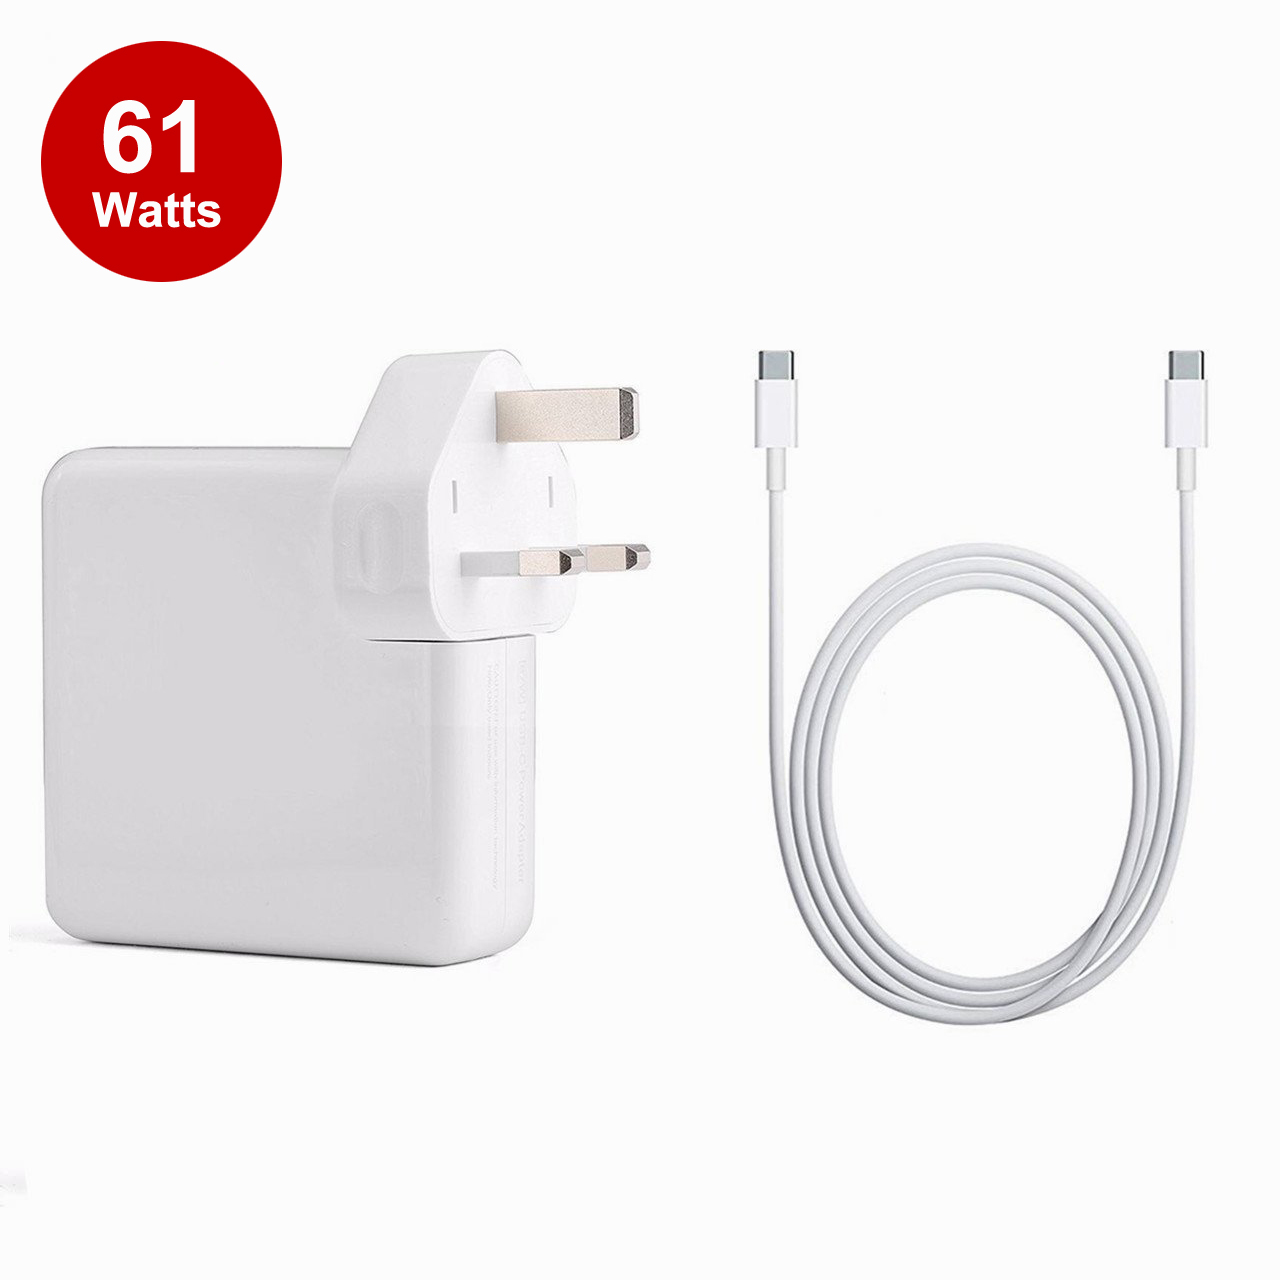 61W USB-C Power Adapter Charger for MacBook Pro 13 inch UK Plug